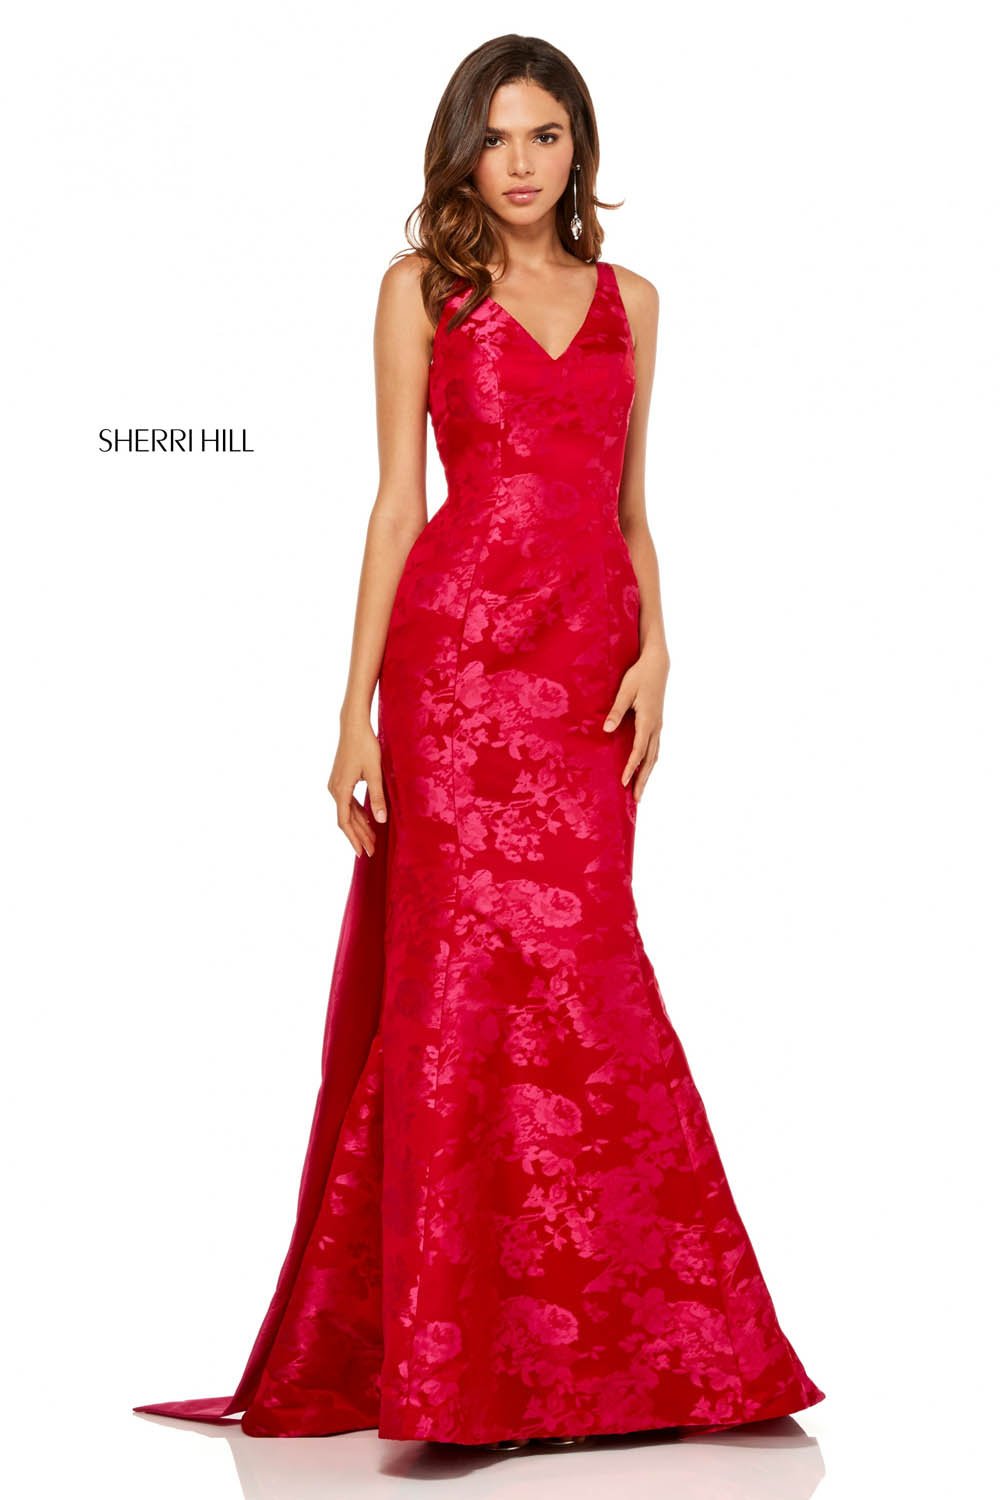 Sherri Hill 52637 dress images in these colors: Red Print.